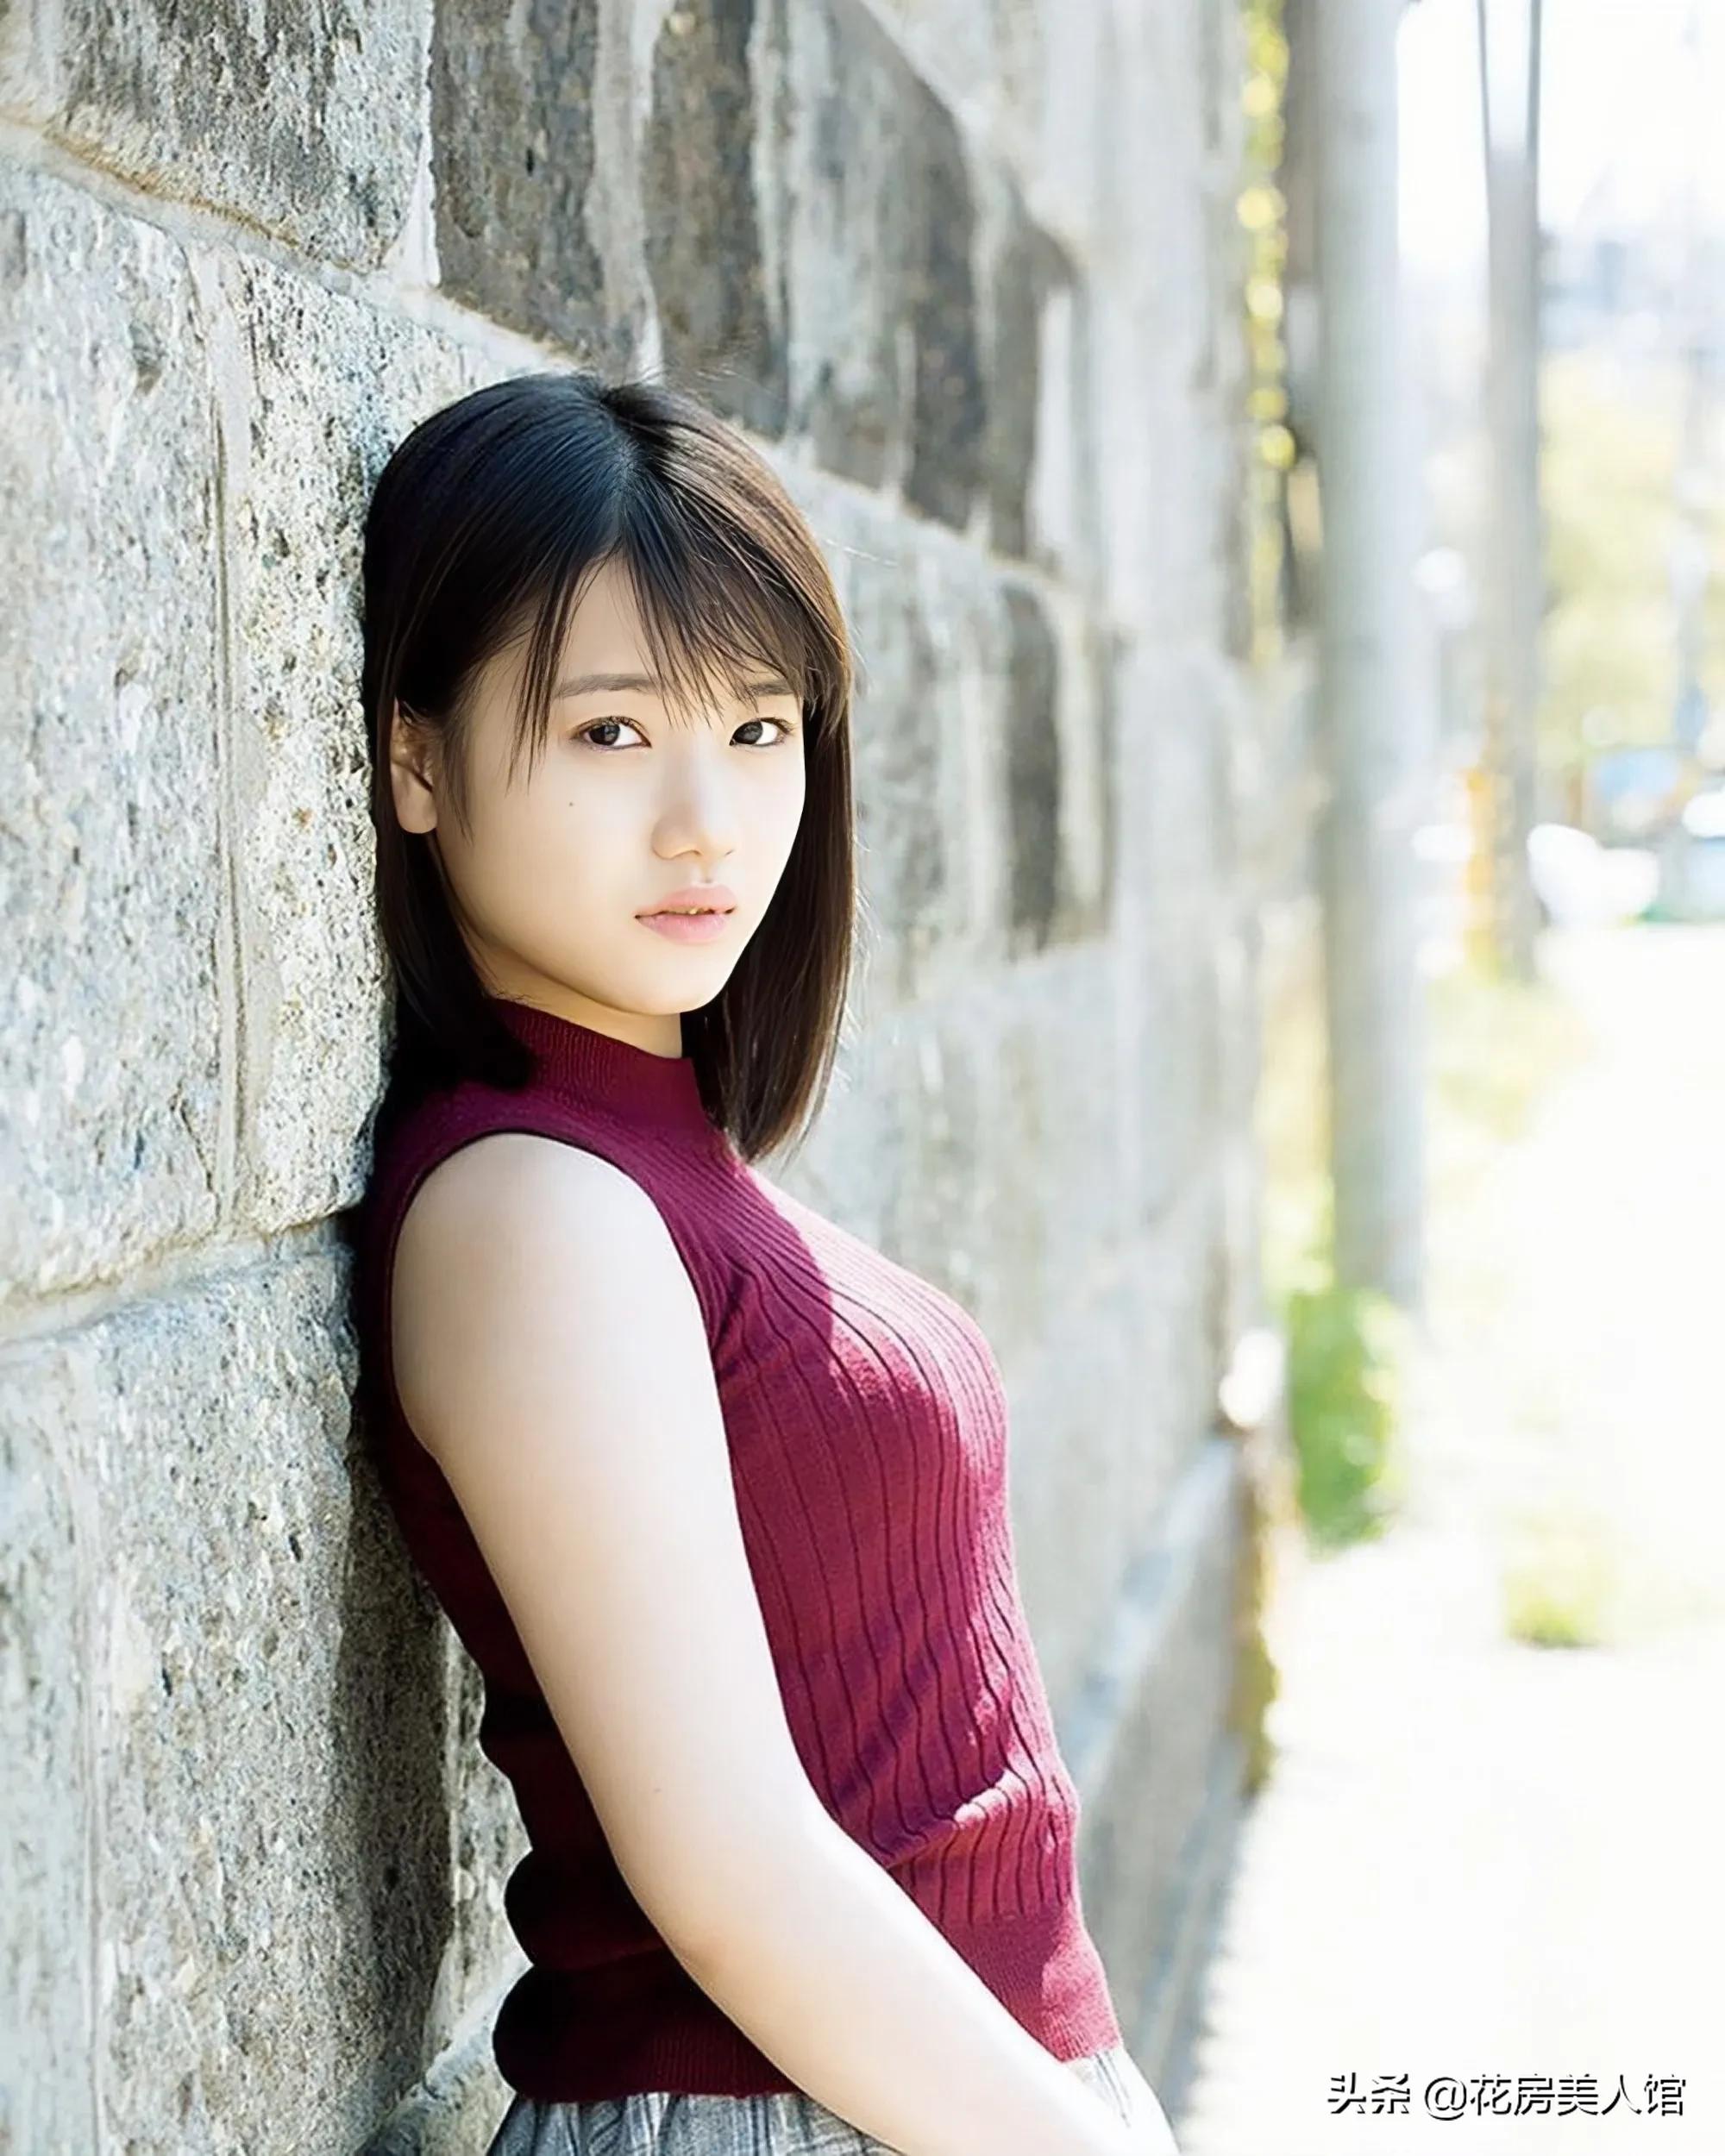 Japanese Super Sexy Girl Ryo Kitagawa Has Exquisite Features Sweet Looks And Perfect Body Inews